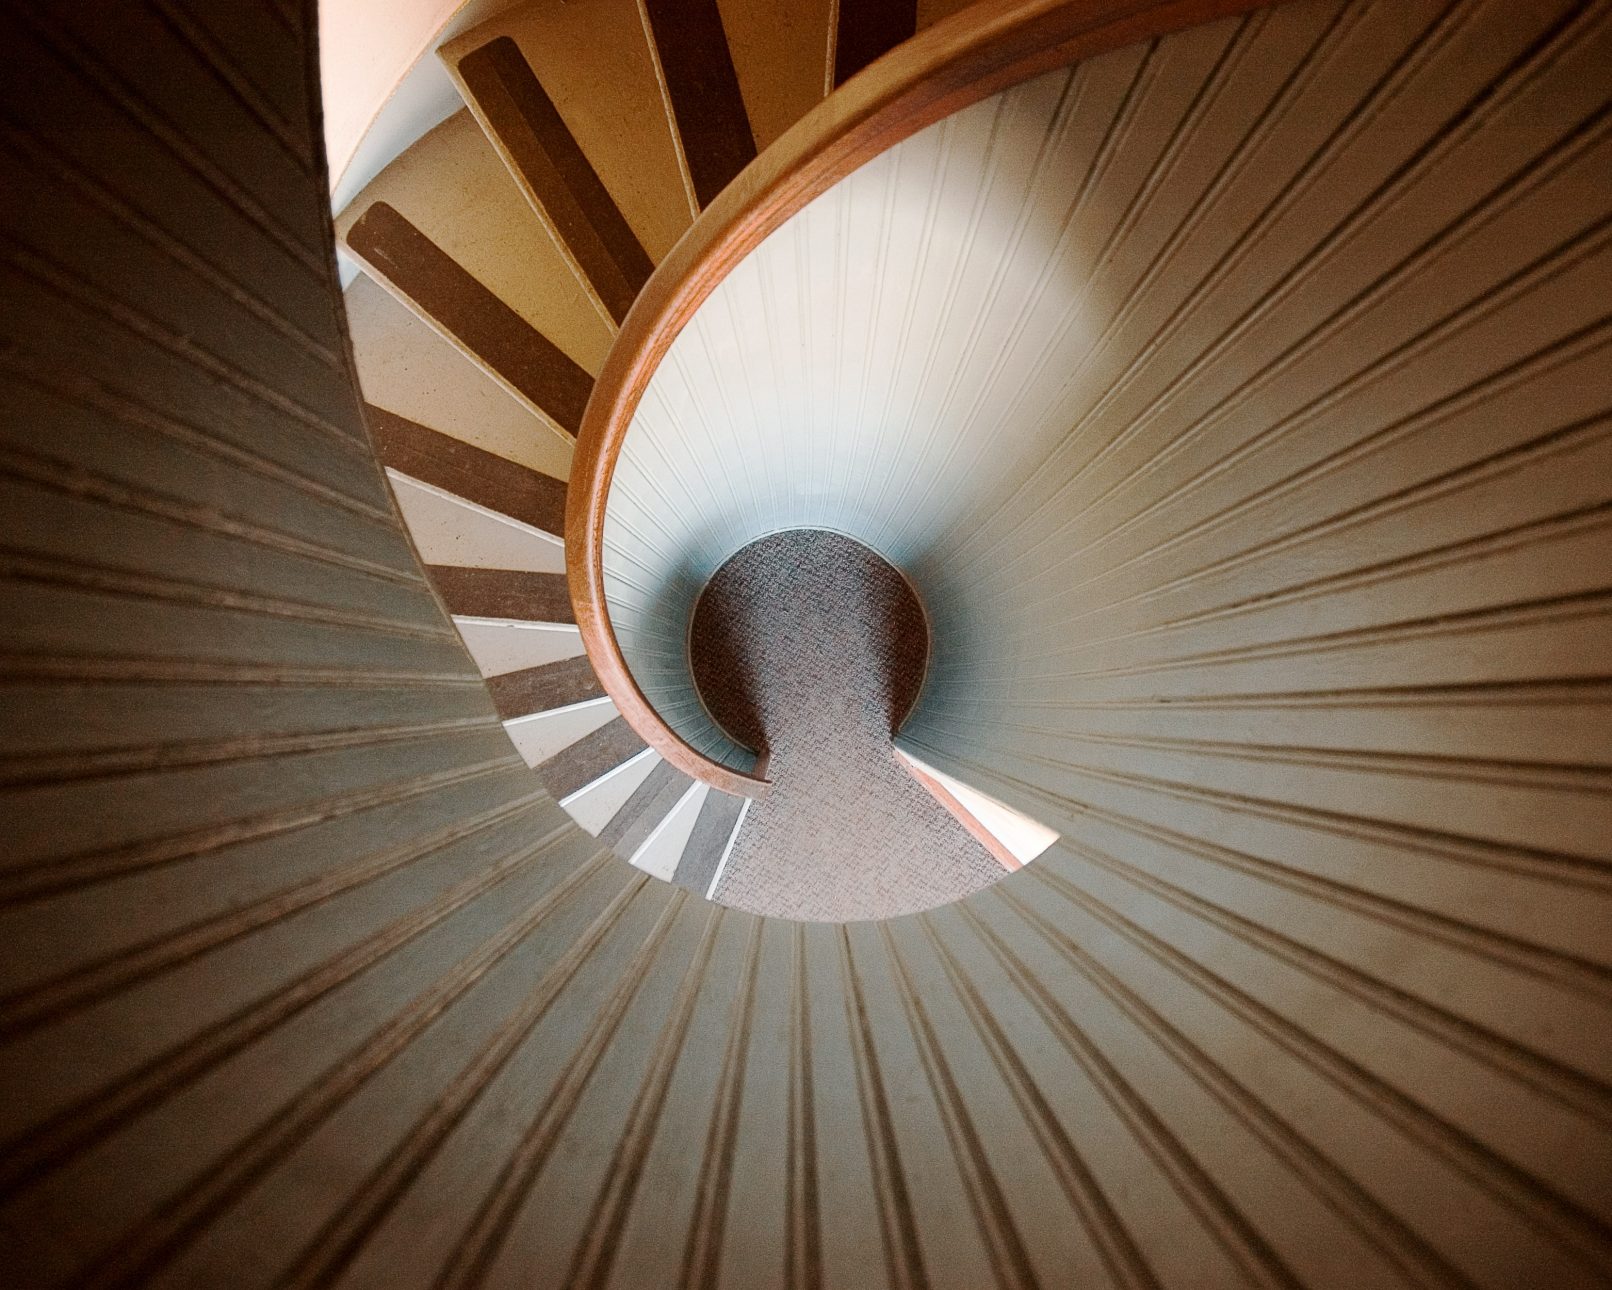 Spiral staircase at Point Loma Lighthouse, San Diego